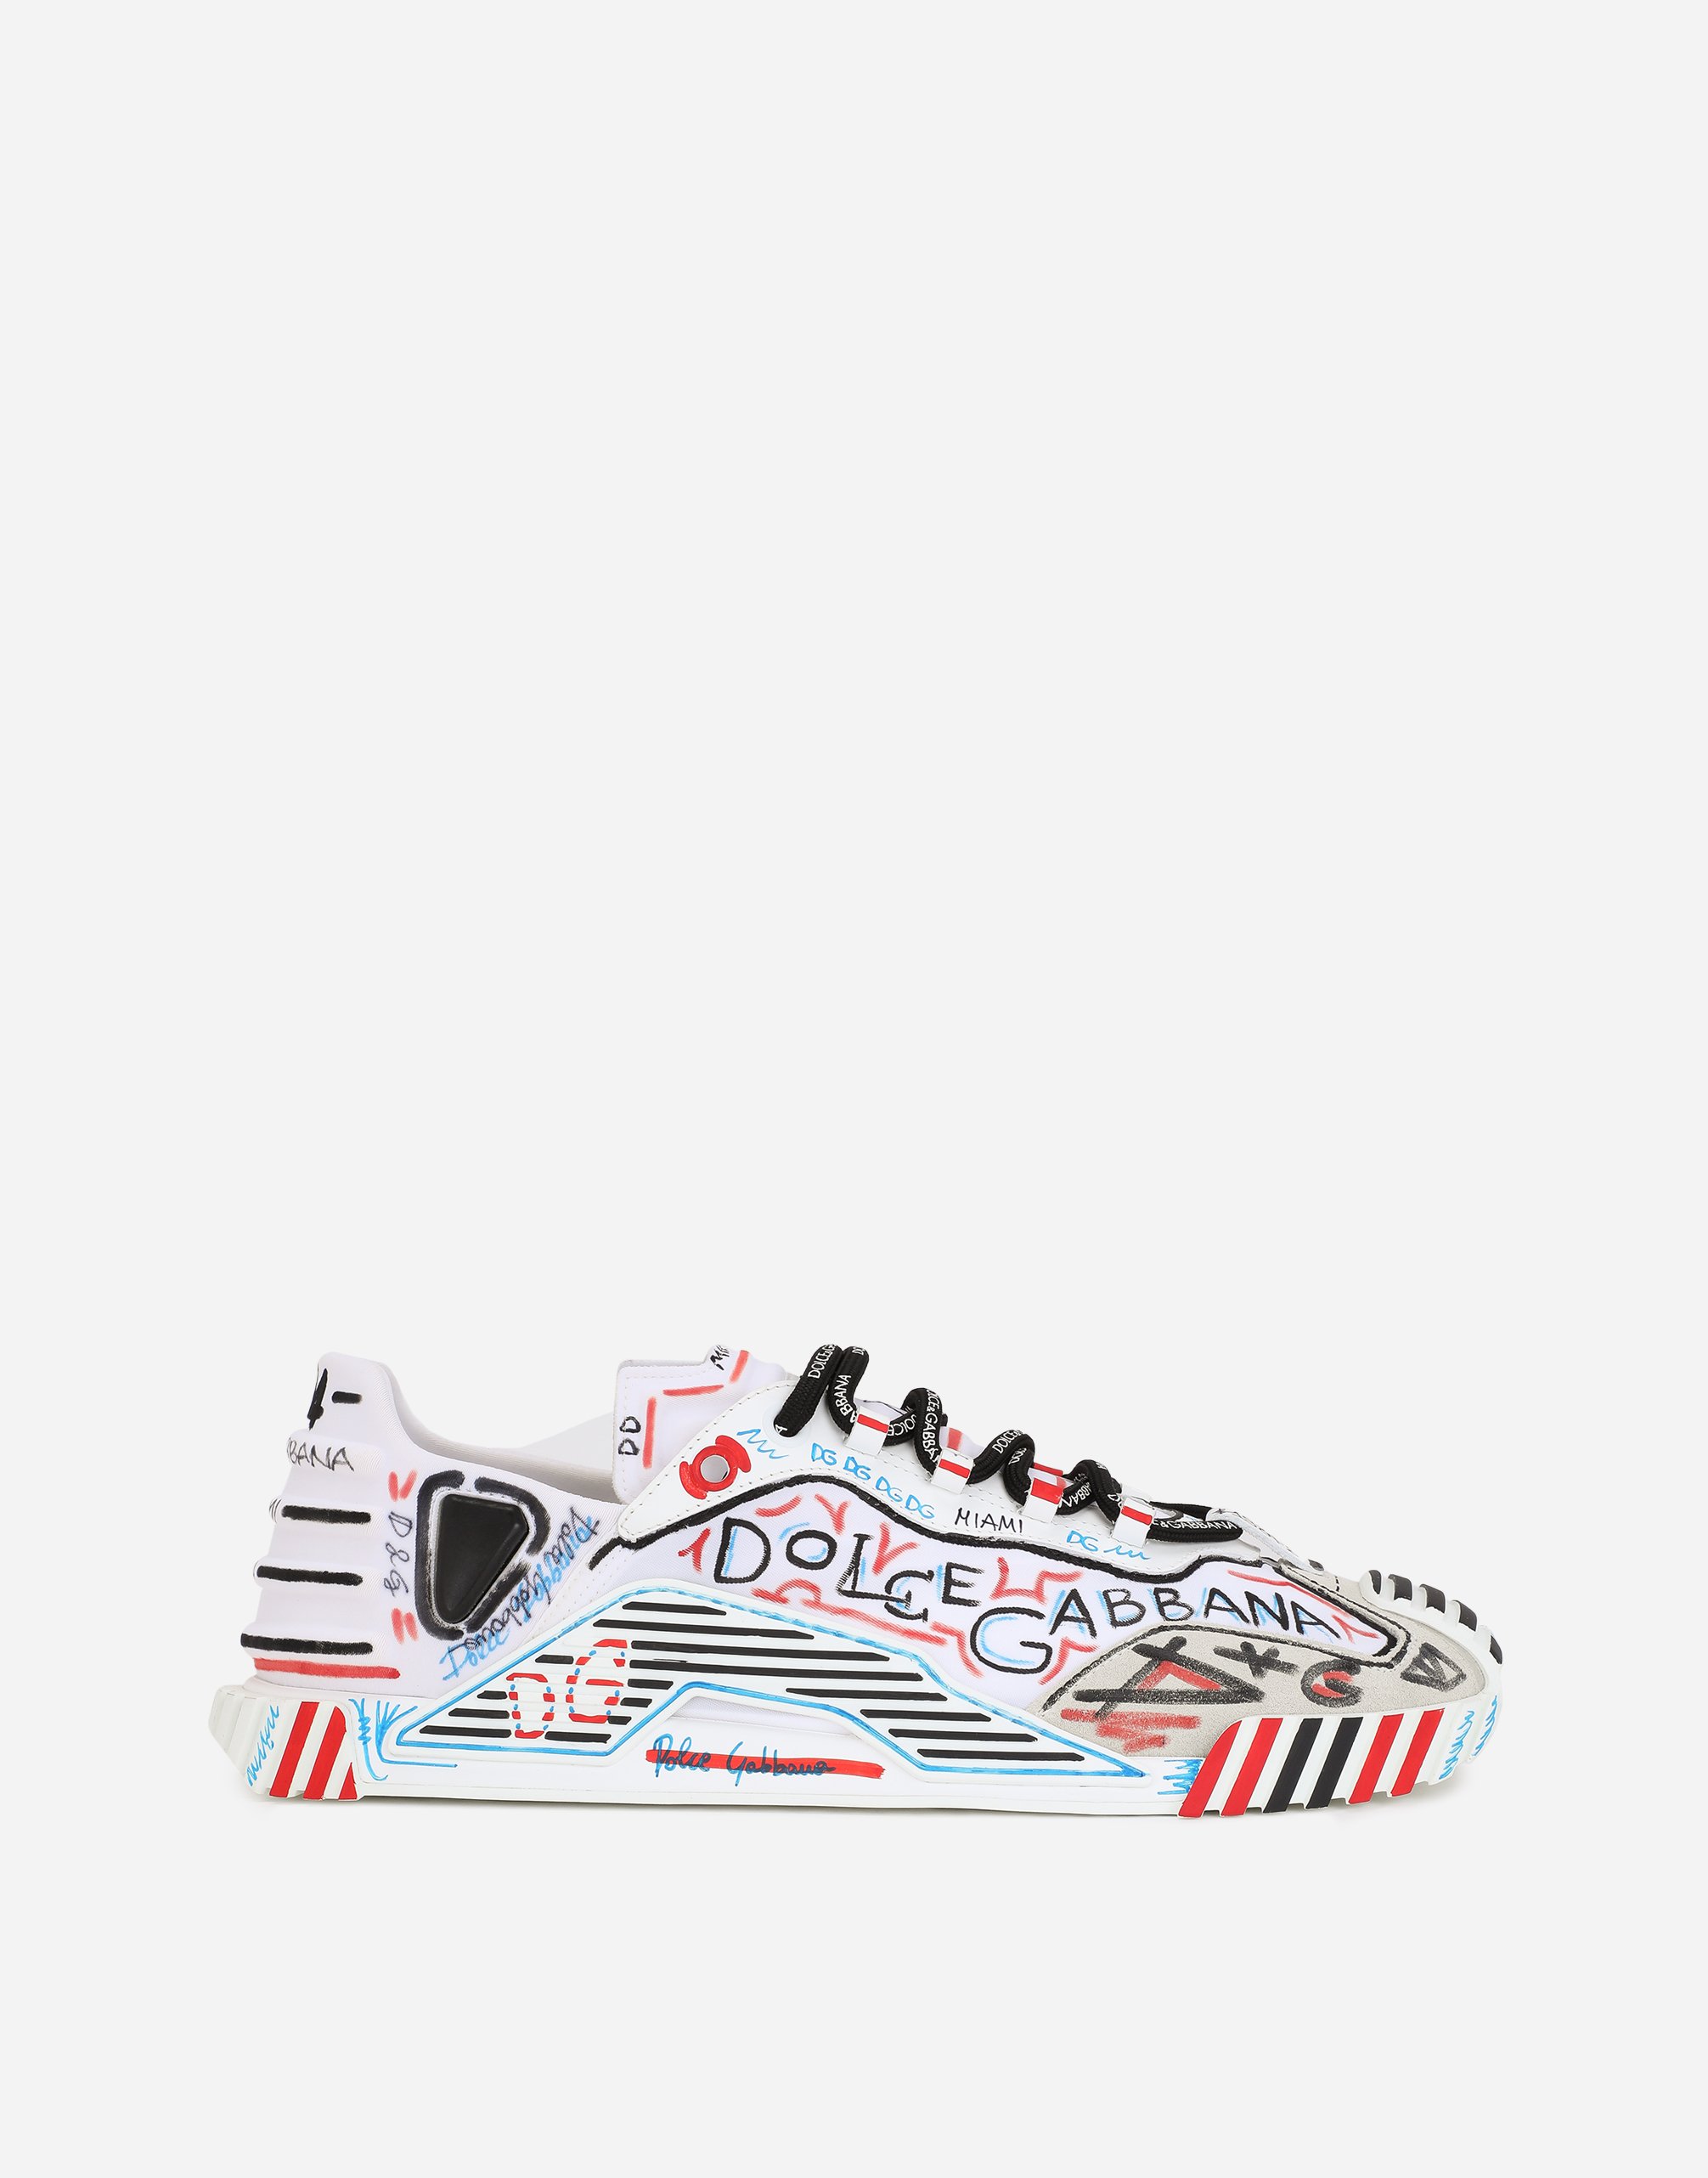 Mixed-materials Miami NS1 slip-on sneakers in Miami